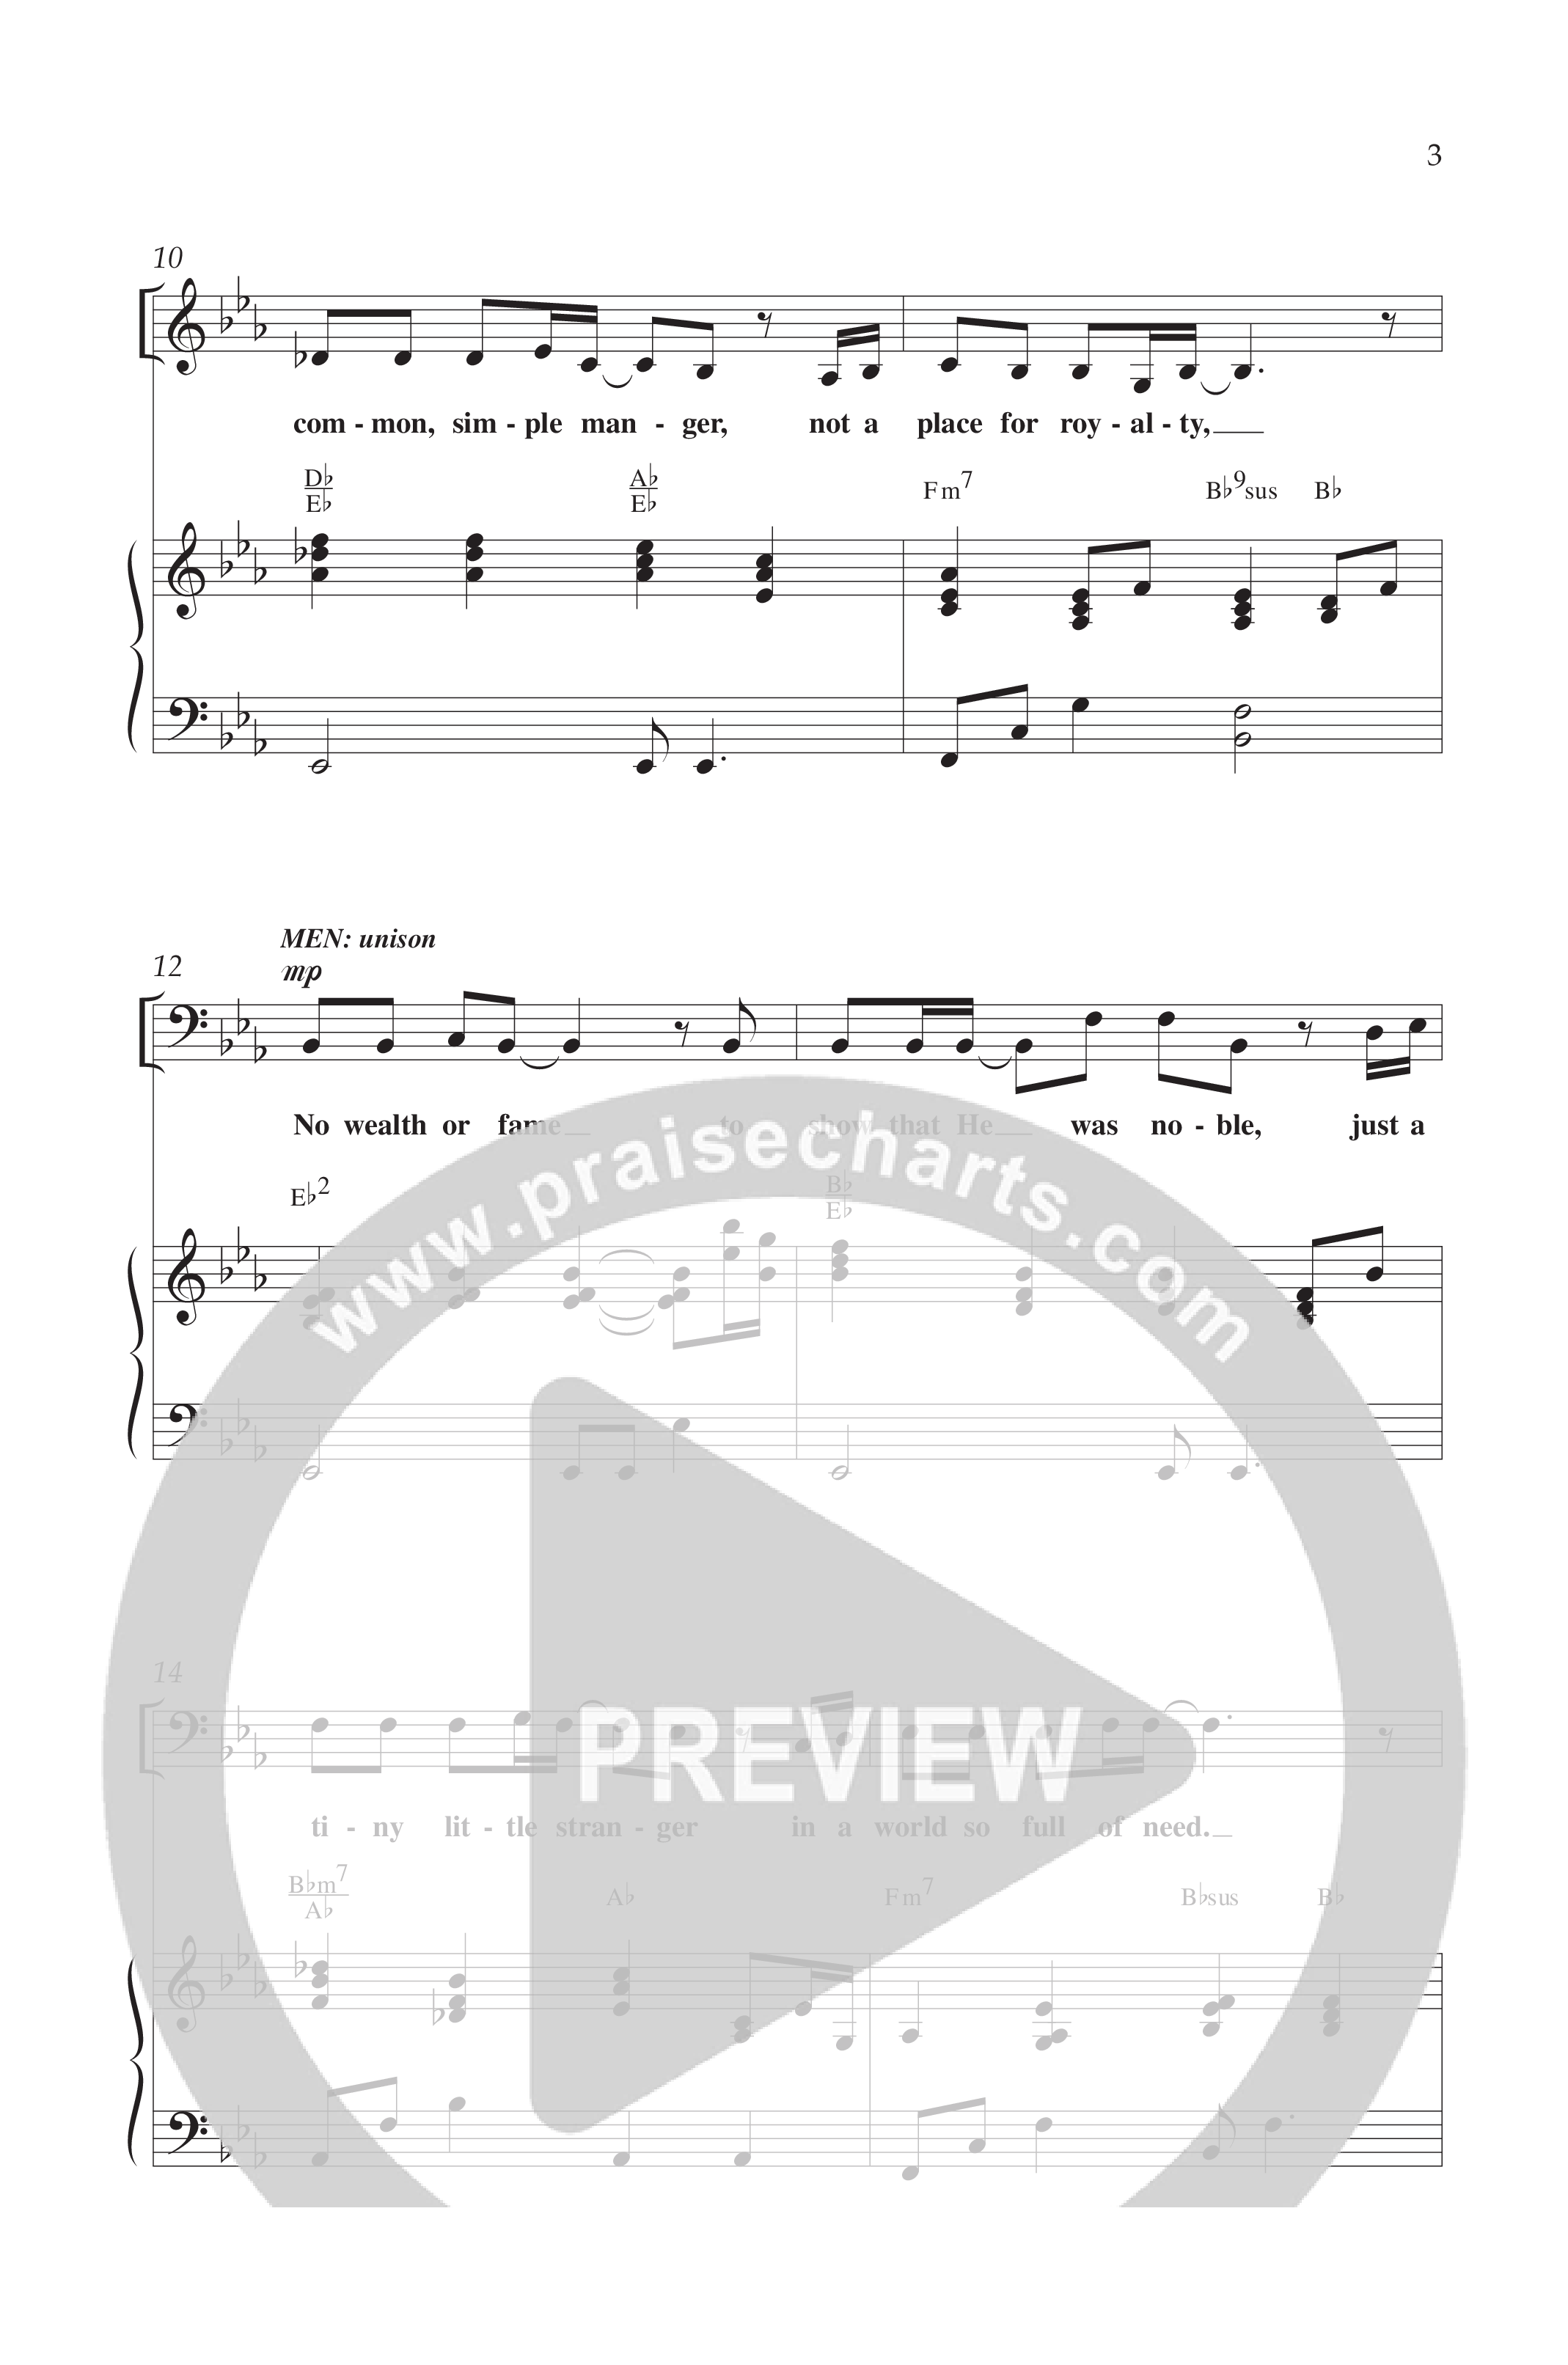 The Next Time He Comes (with Hallelujah What A Savior) (Choral Anthem SATB) Anthem (SATB/Piano) (Lifeway Choral / Arr. Dave Williamson)